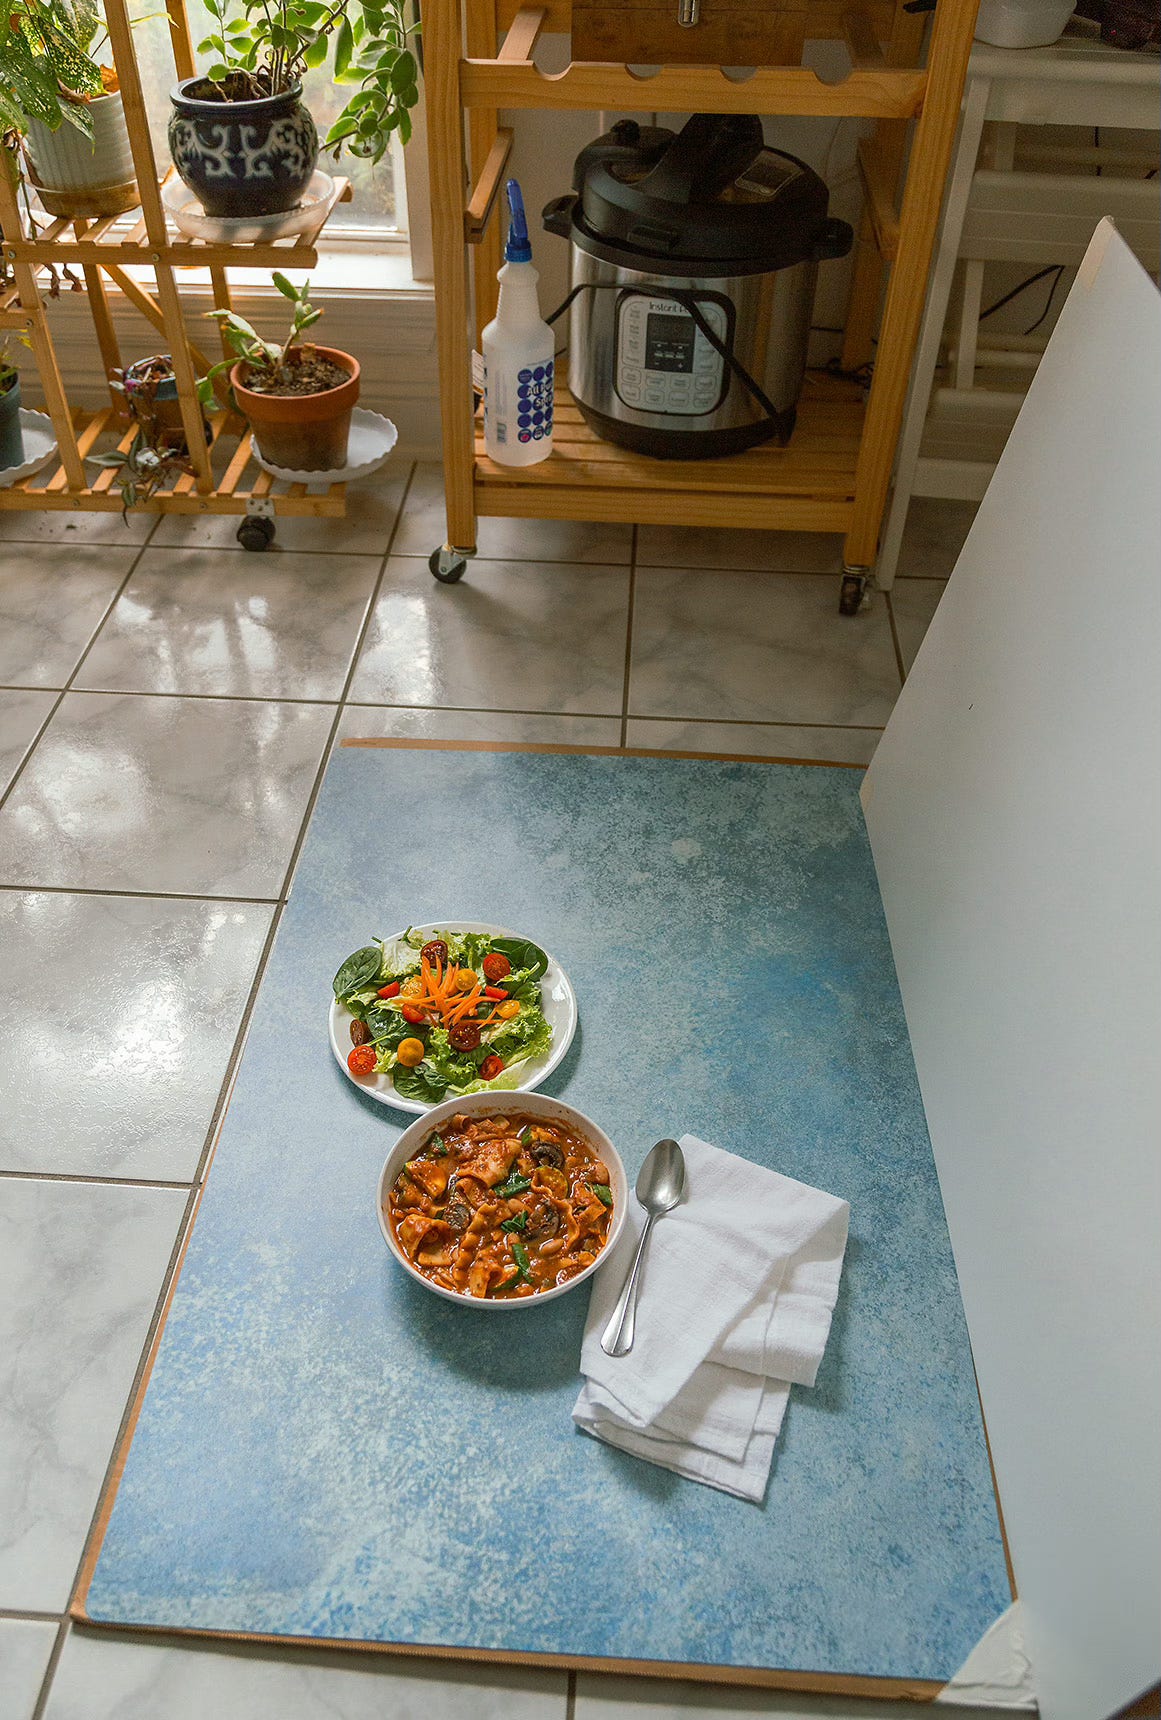 Background board and food set up on kitchen floor